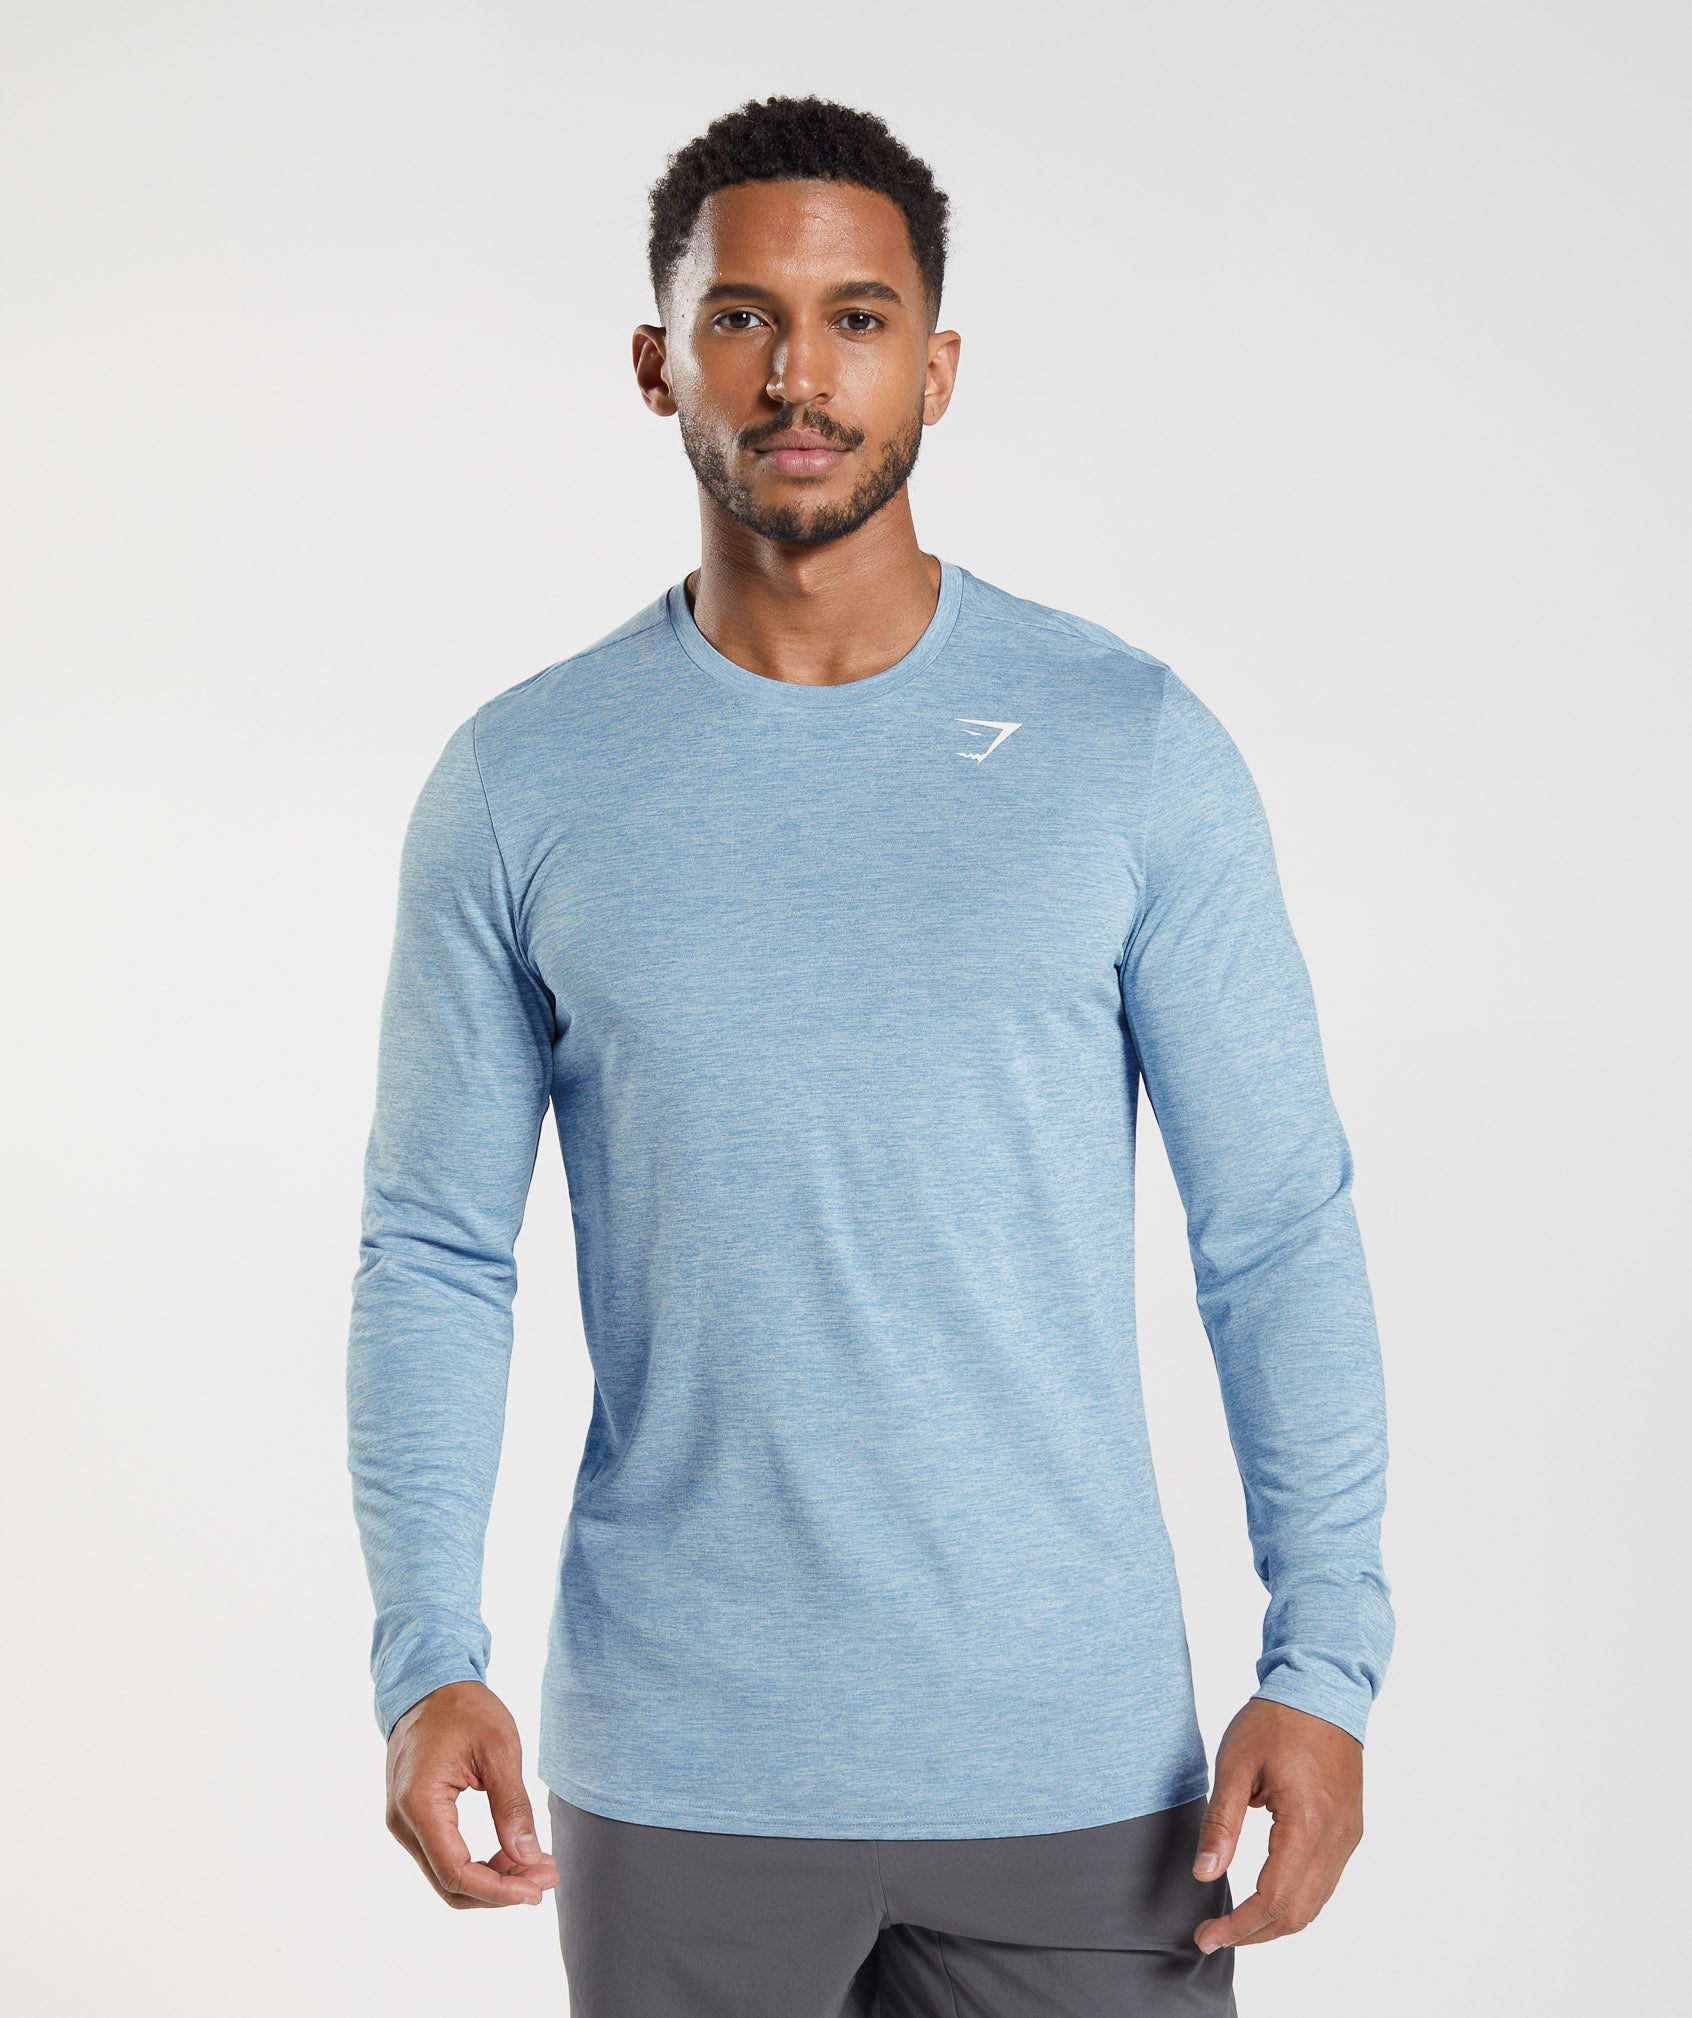 Arrival Long Sleeve T-Shirt in Ozone Blue/Skyline Blue Marl - view 1